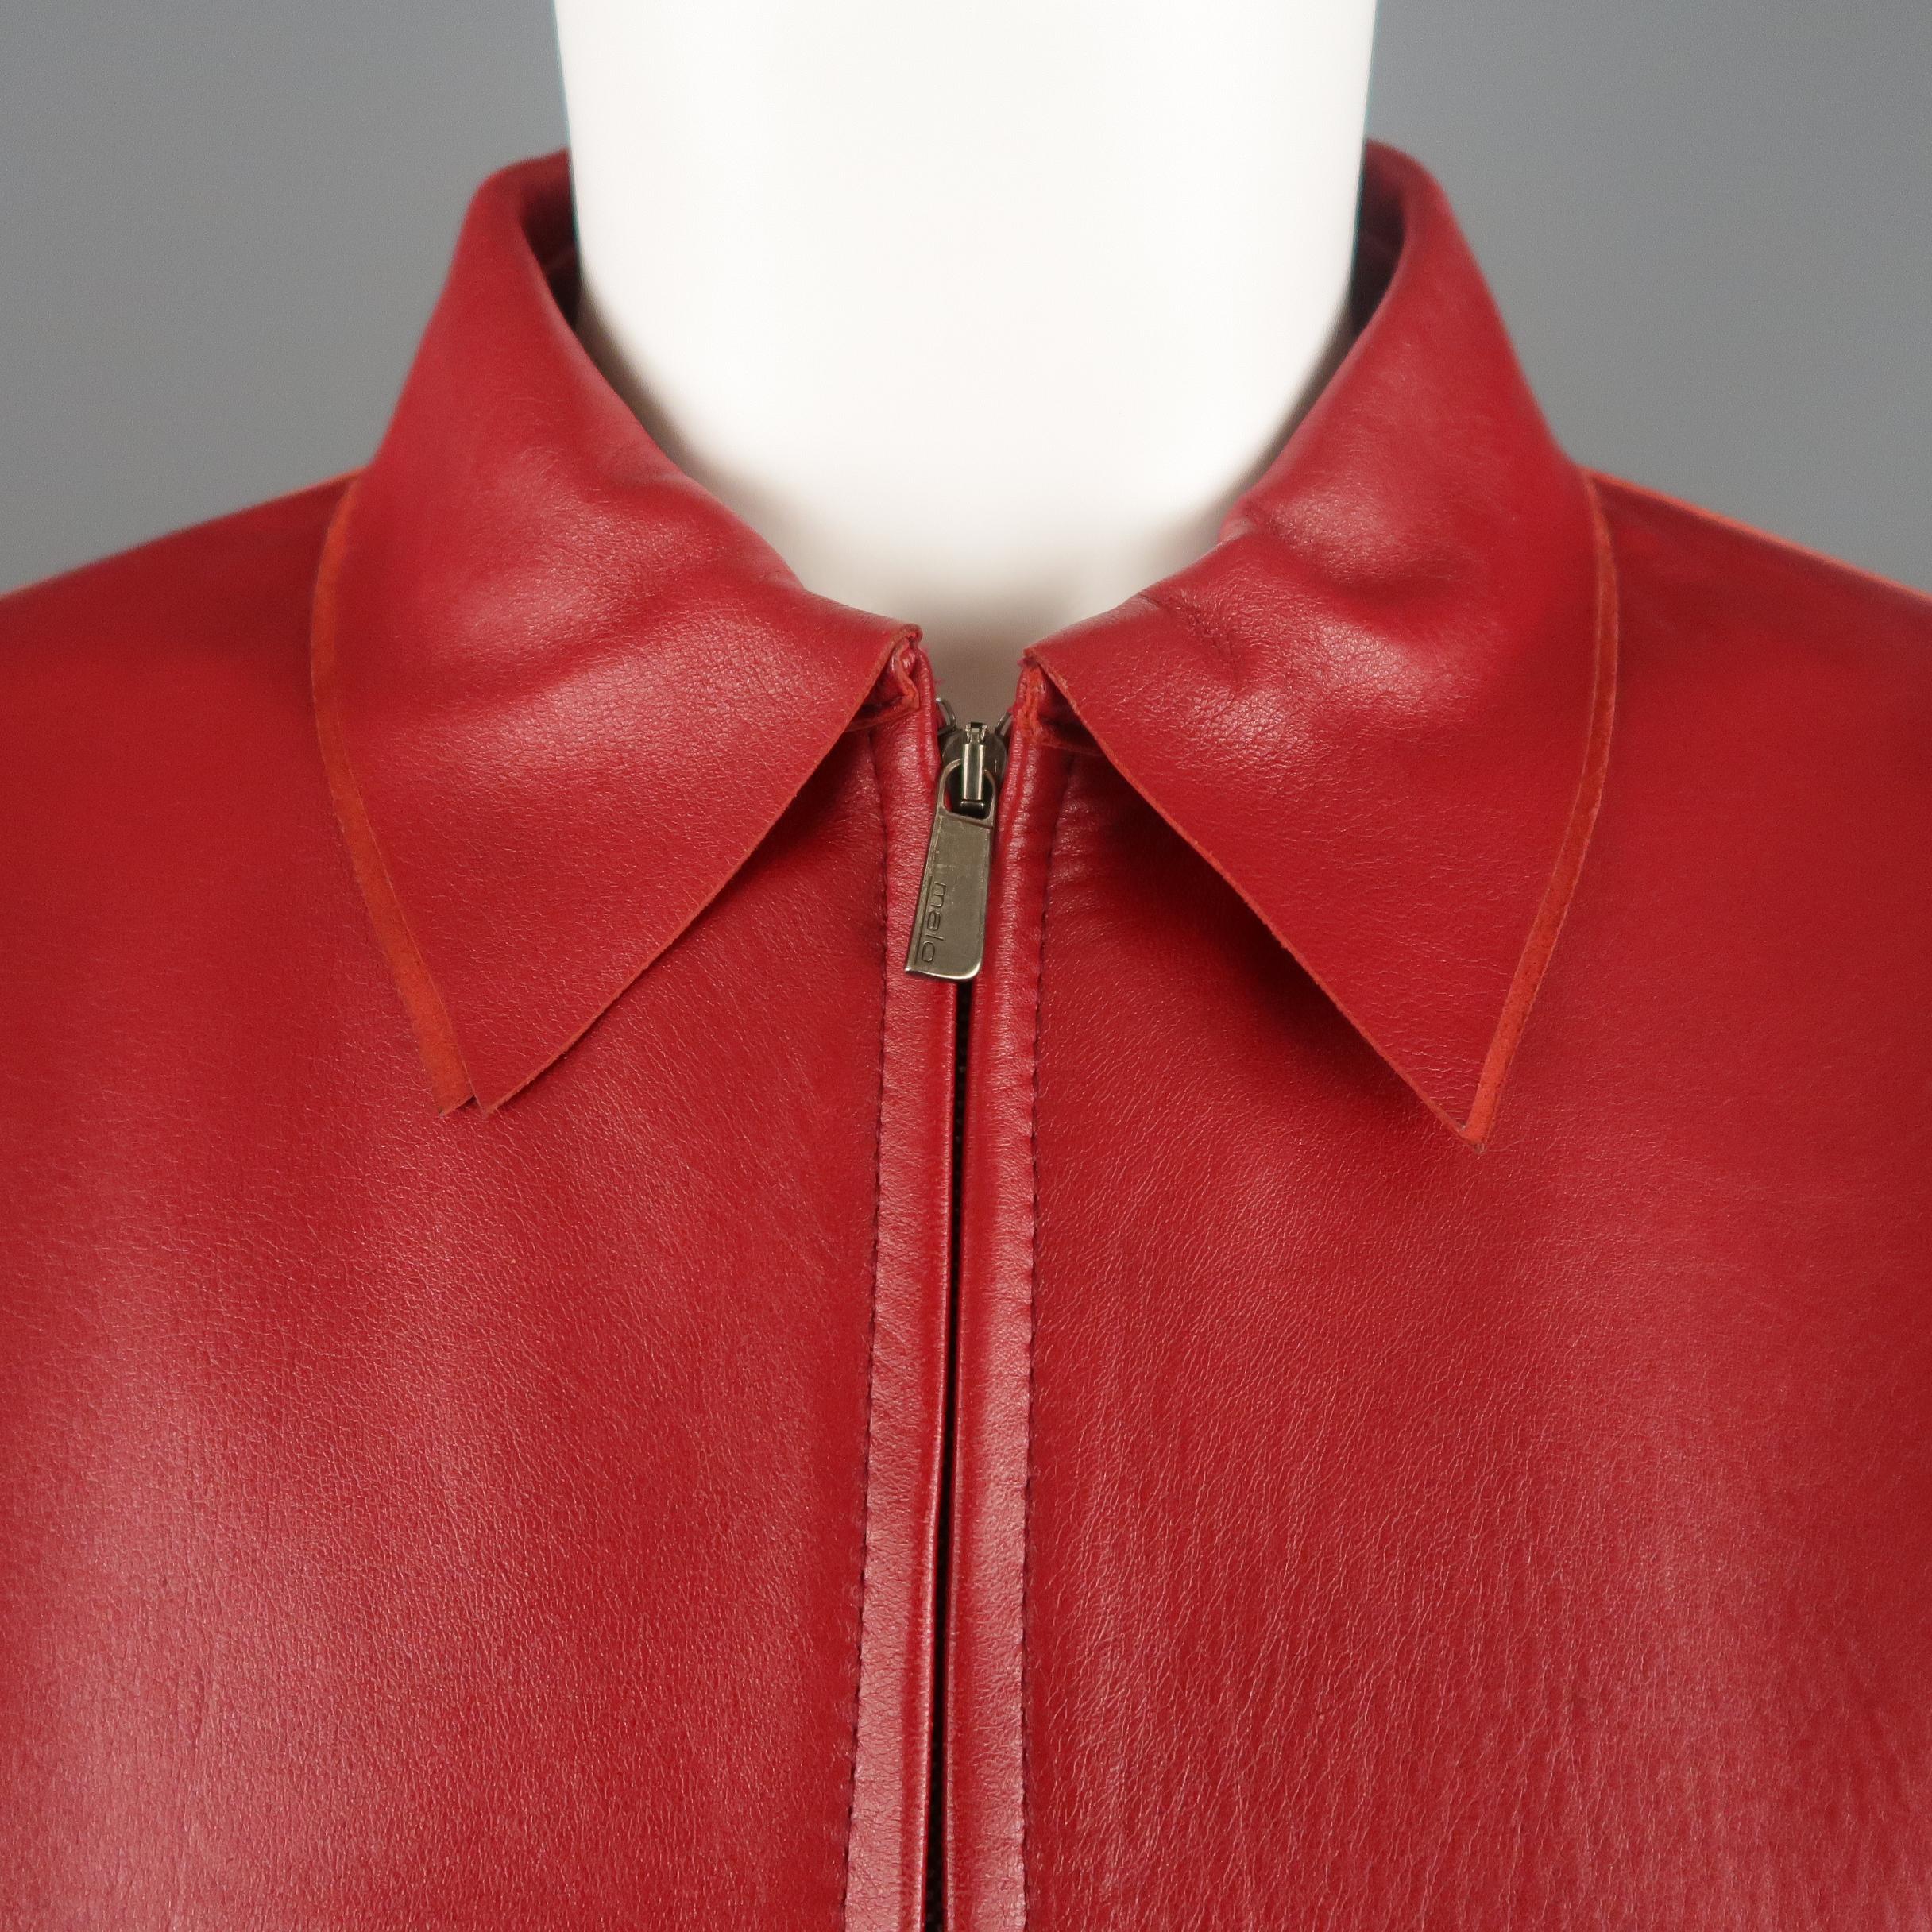 MALO jacket comes in red smooth leather with a layered pointed collar, cuffed sleeve, and double zip front. Lined in leather. Some spots shown in detail shots. As-is. Made in Italy.
 
Good Pre-Owned Condition.
Marked: IT 42
 
Measurements:
